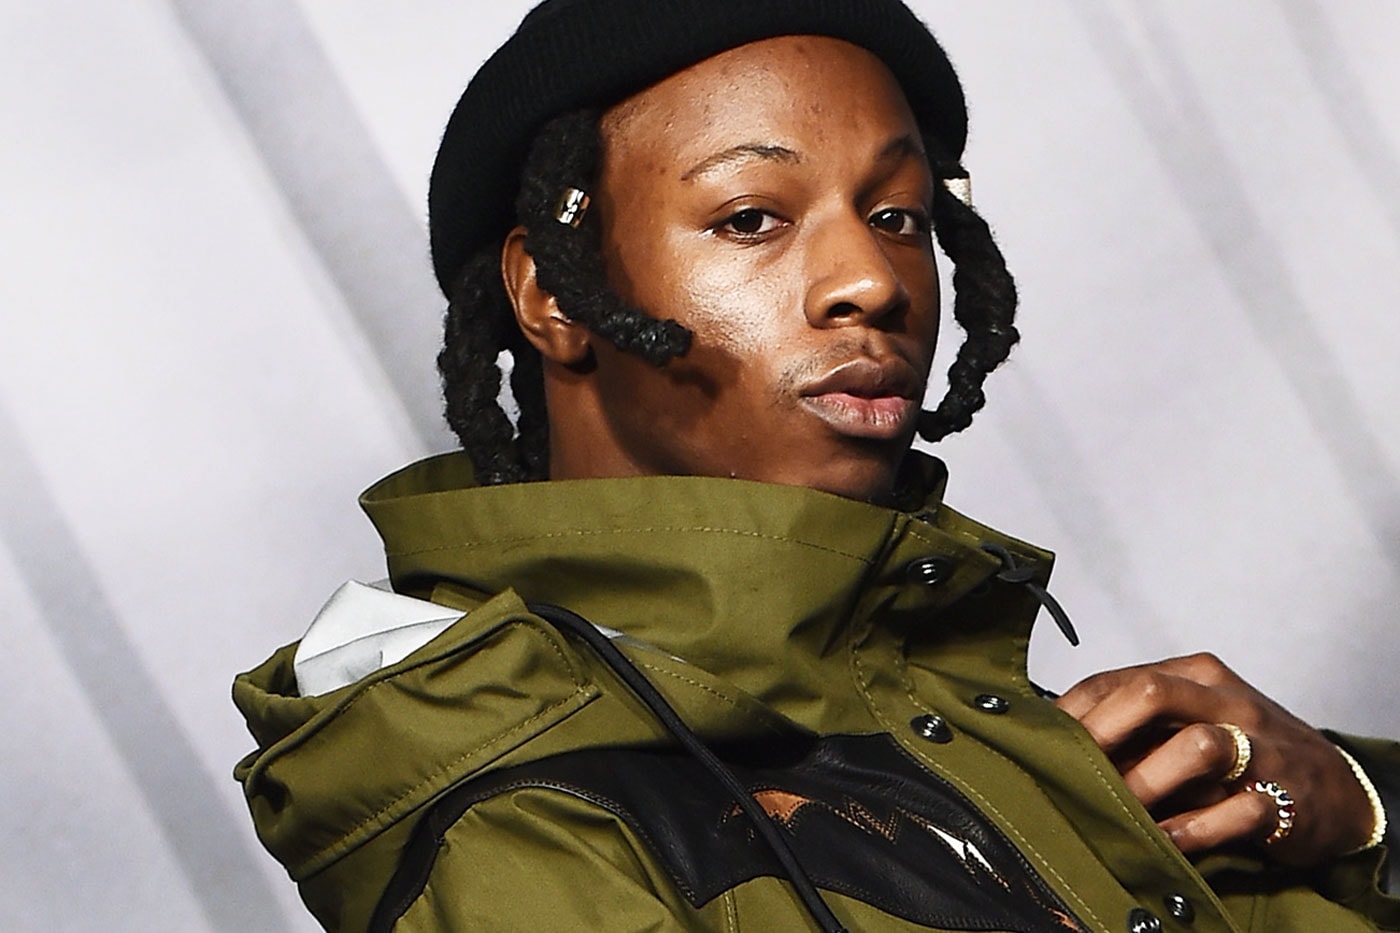 Joey Bada$$ Discusses the Presidential Elections on ‘The Nightly Show’